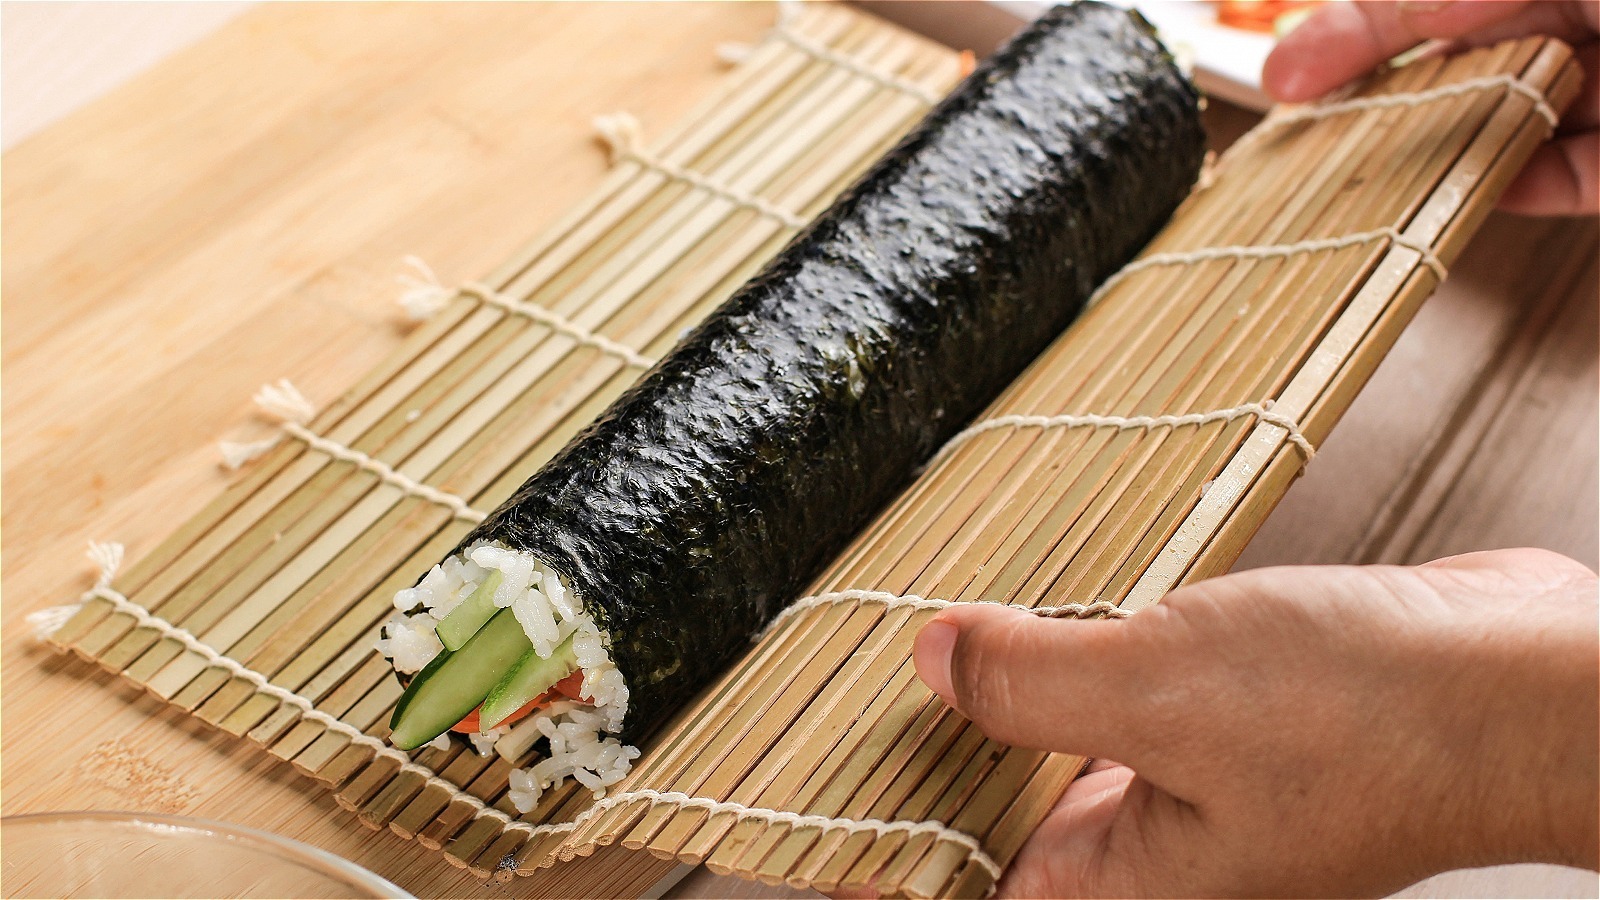 https://www.mashed.com/img/gallery/tiktoks-viral-sushi-making-tool-is-a-convenient-alternative-to-bamboo-mats/l-intro-1677196358.jpg